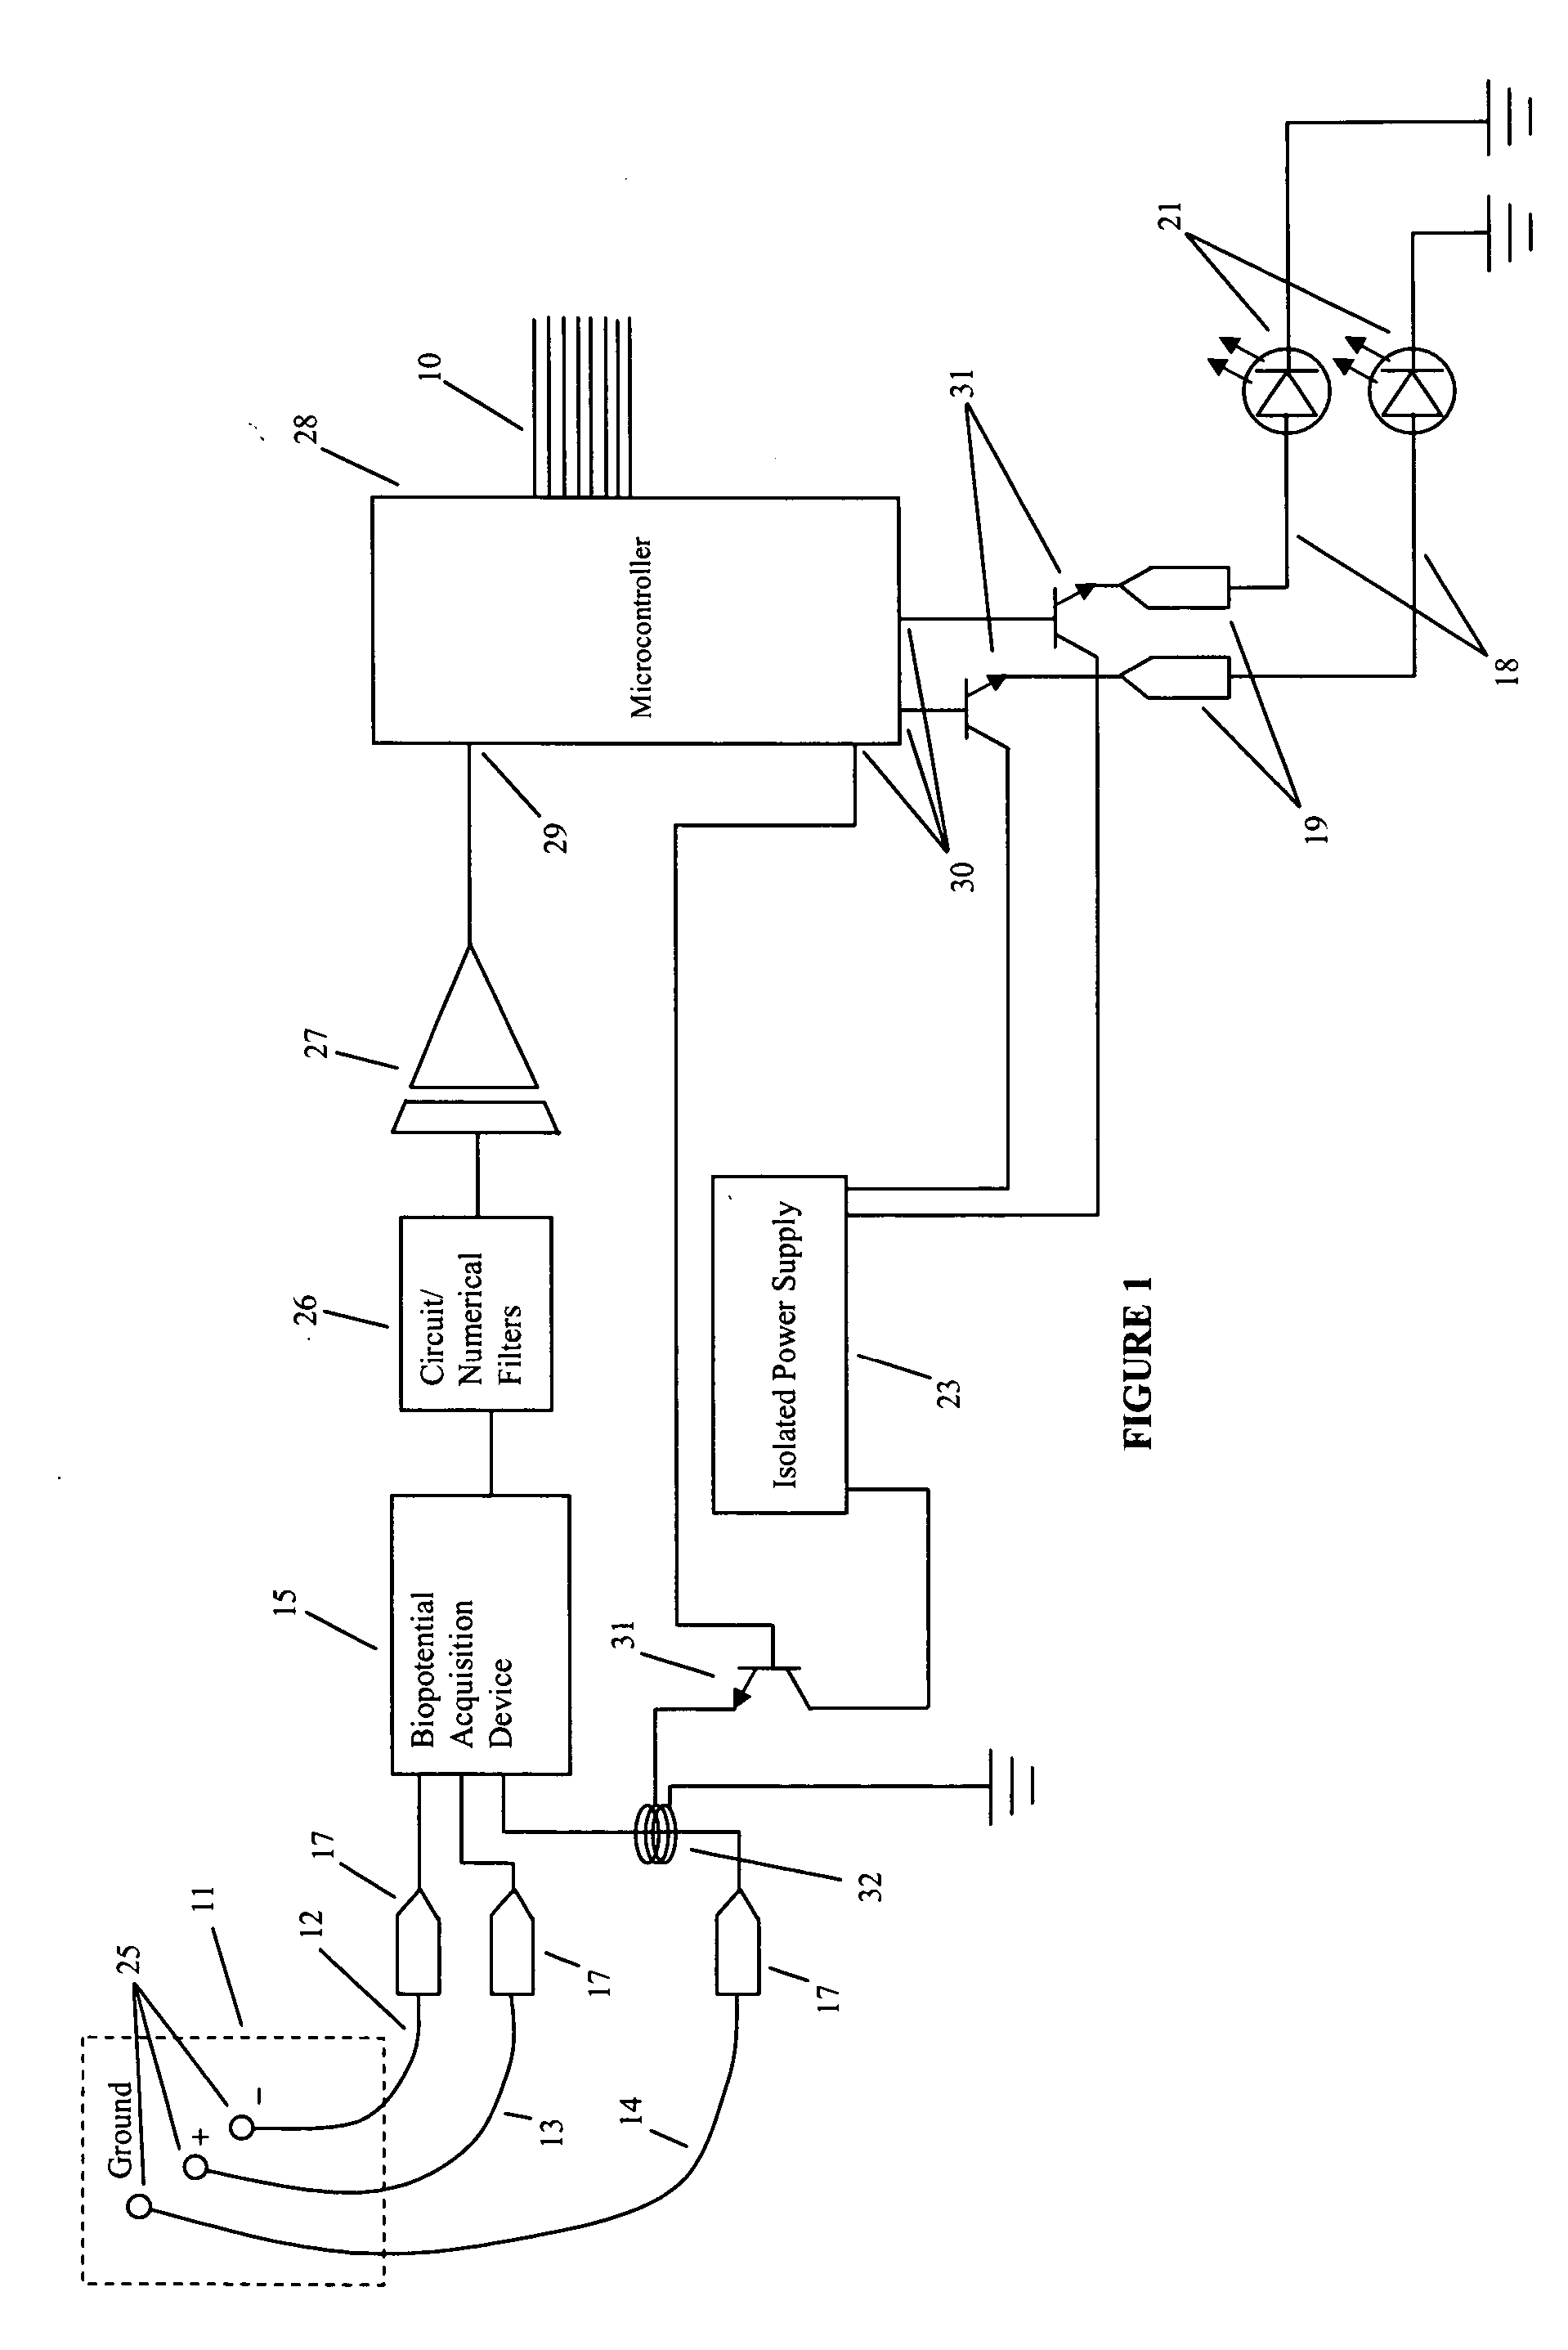 Method and apparatus for utilizing amplitude-modulated pulse-width modulation signals for neurostimulation and treatment of neurological disorders using electrical stimulation